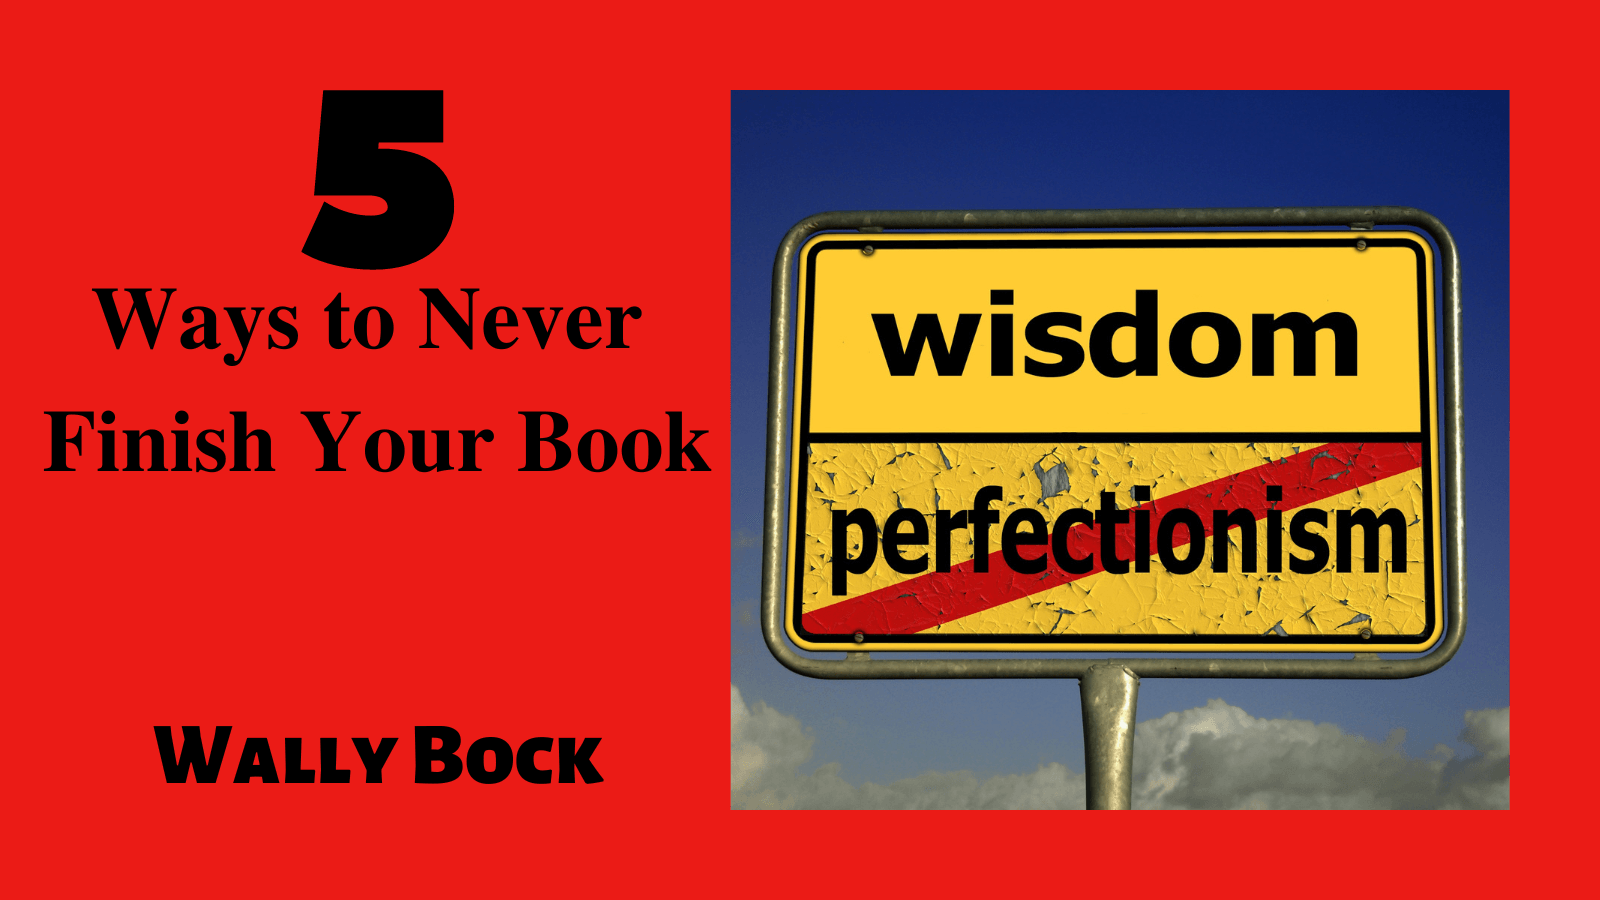 5 Ways to Never Finish Your Book